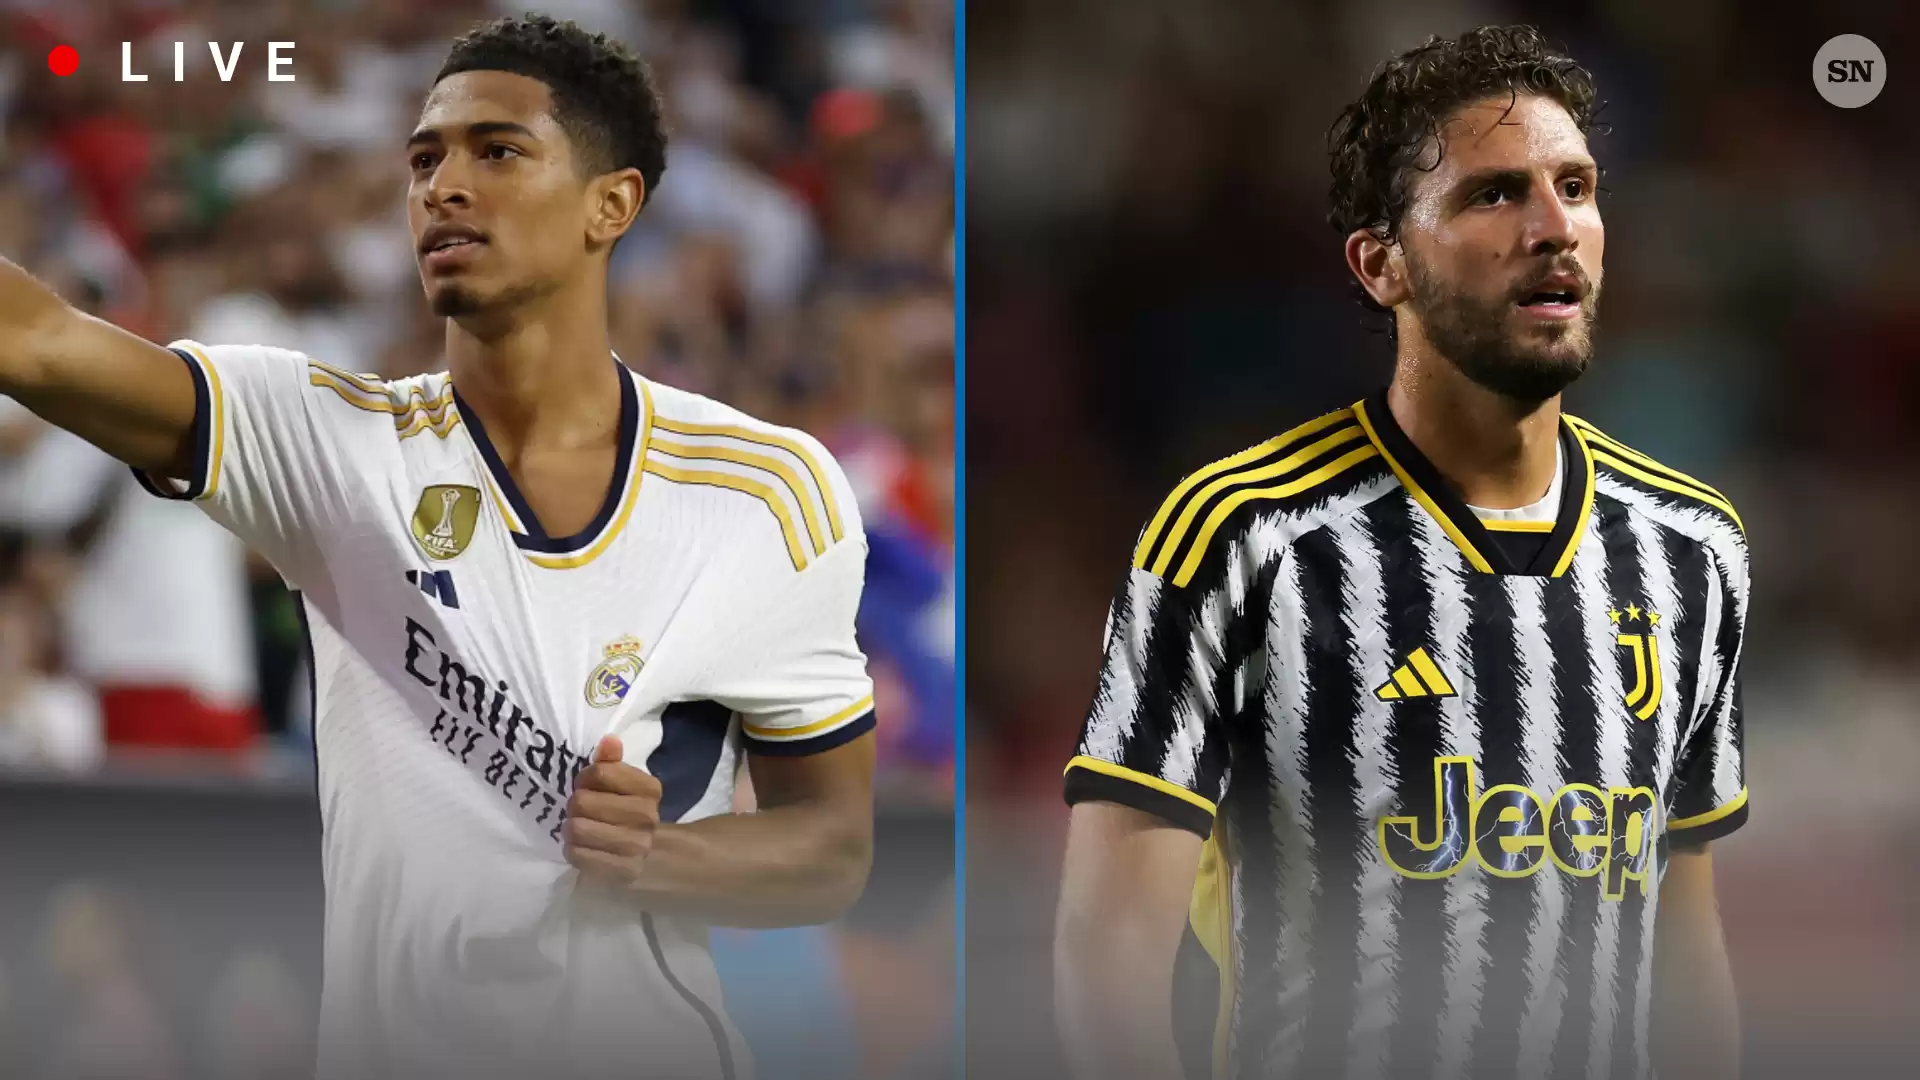 Real Madrid vs Juventus: Live Score, Updates, Highlights, and Result for Orlando Preseason Friendly in USA